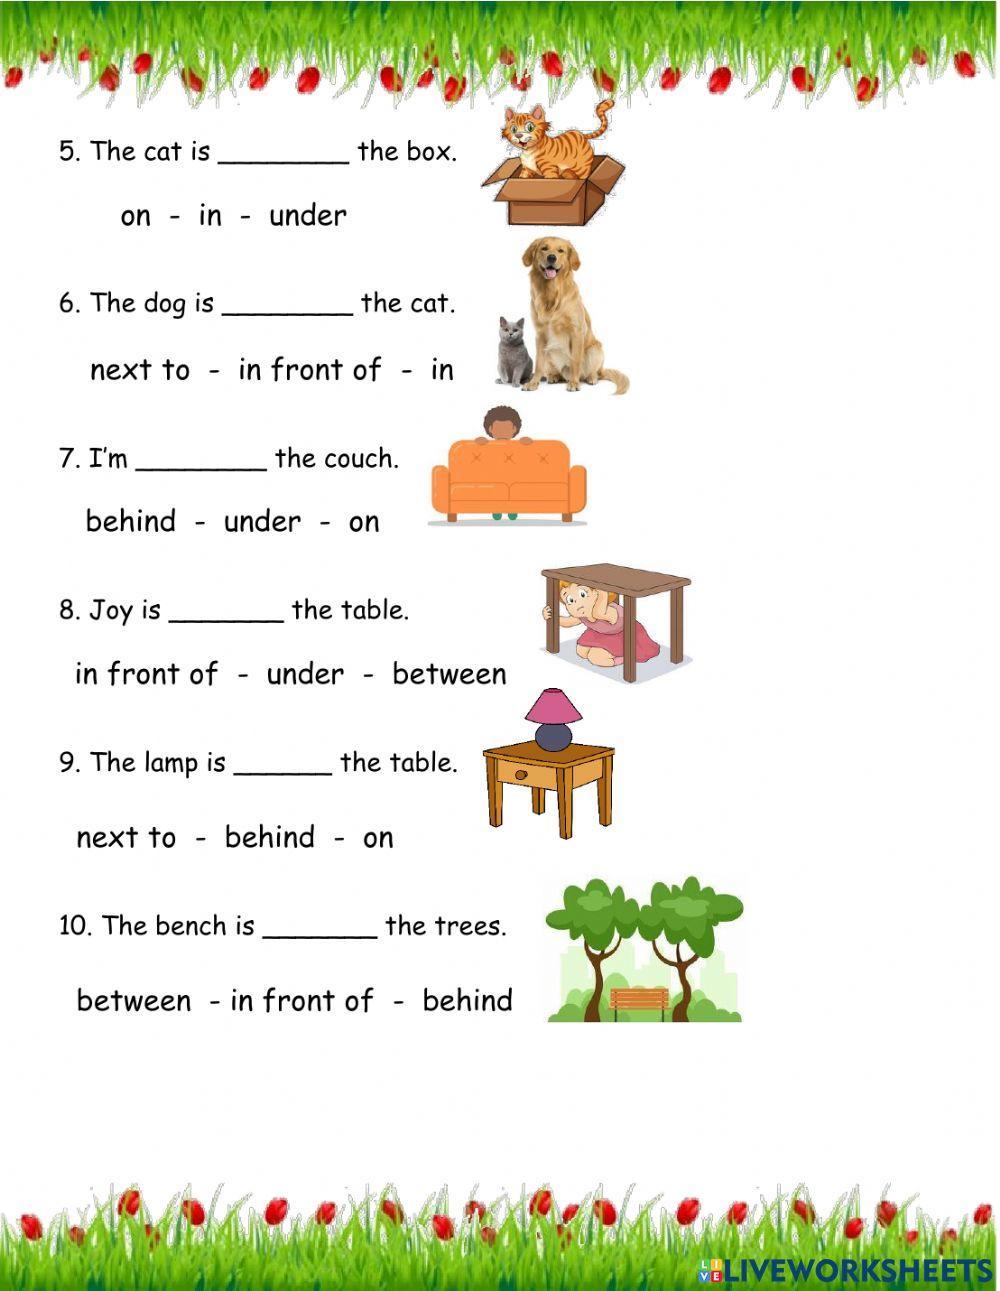 Prepositions of Place online exercise for 2 | Live Worksheets